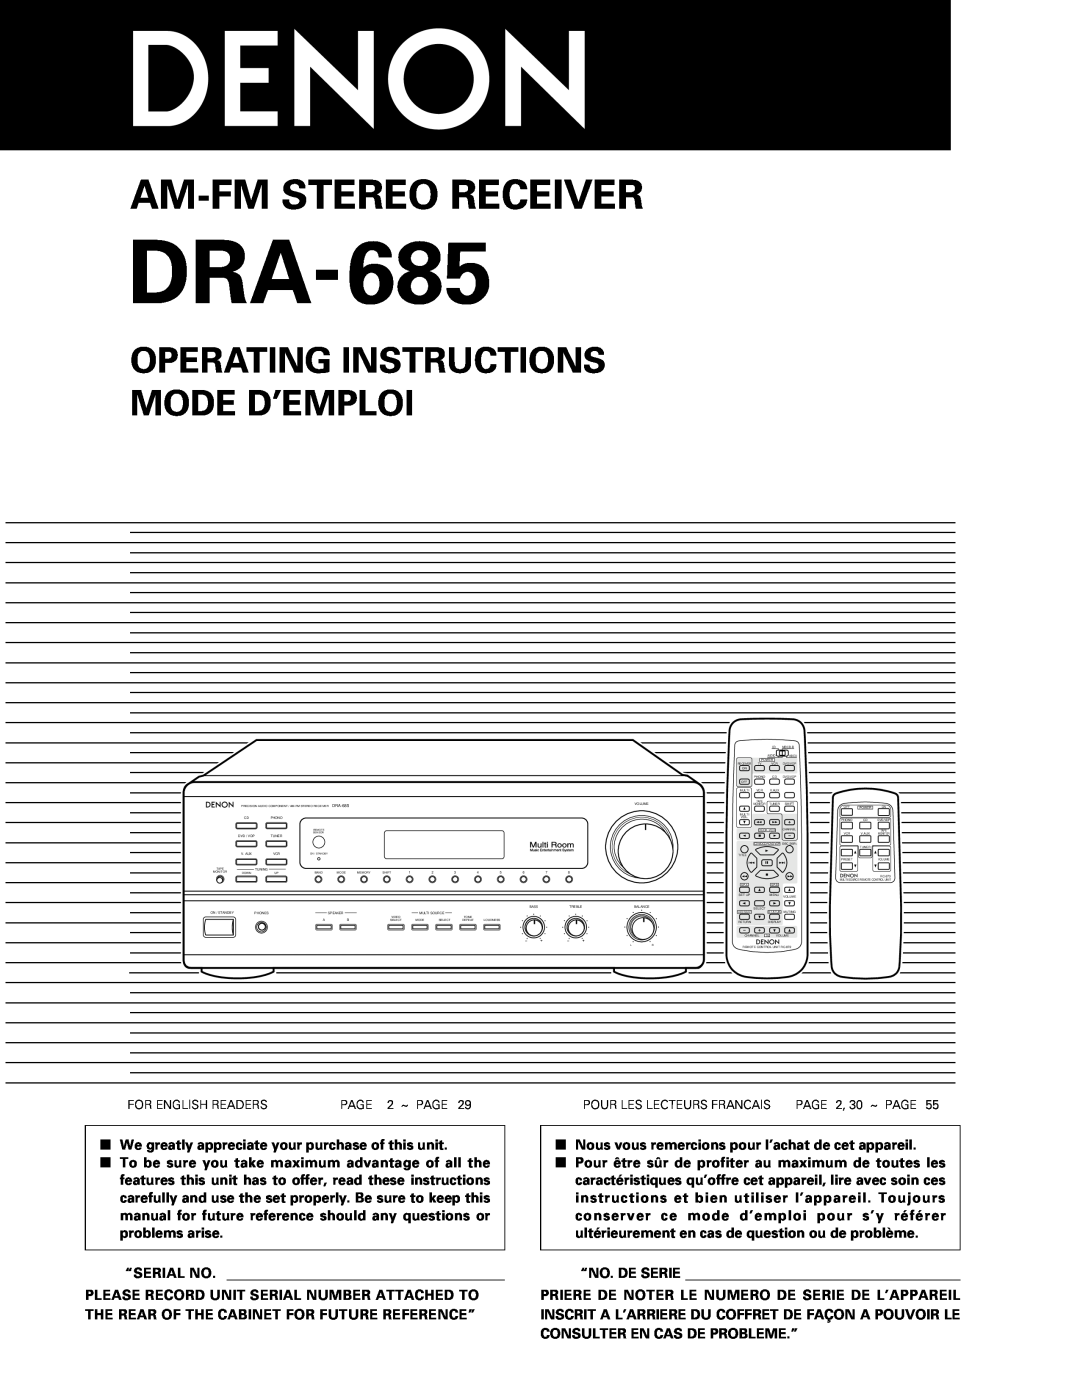 Denon DRA-685 manual Am-Fmstereo Receiver, Operating Instructions Mode D’Emploi 